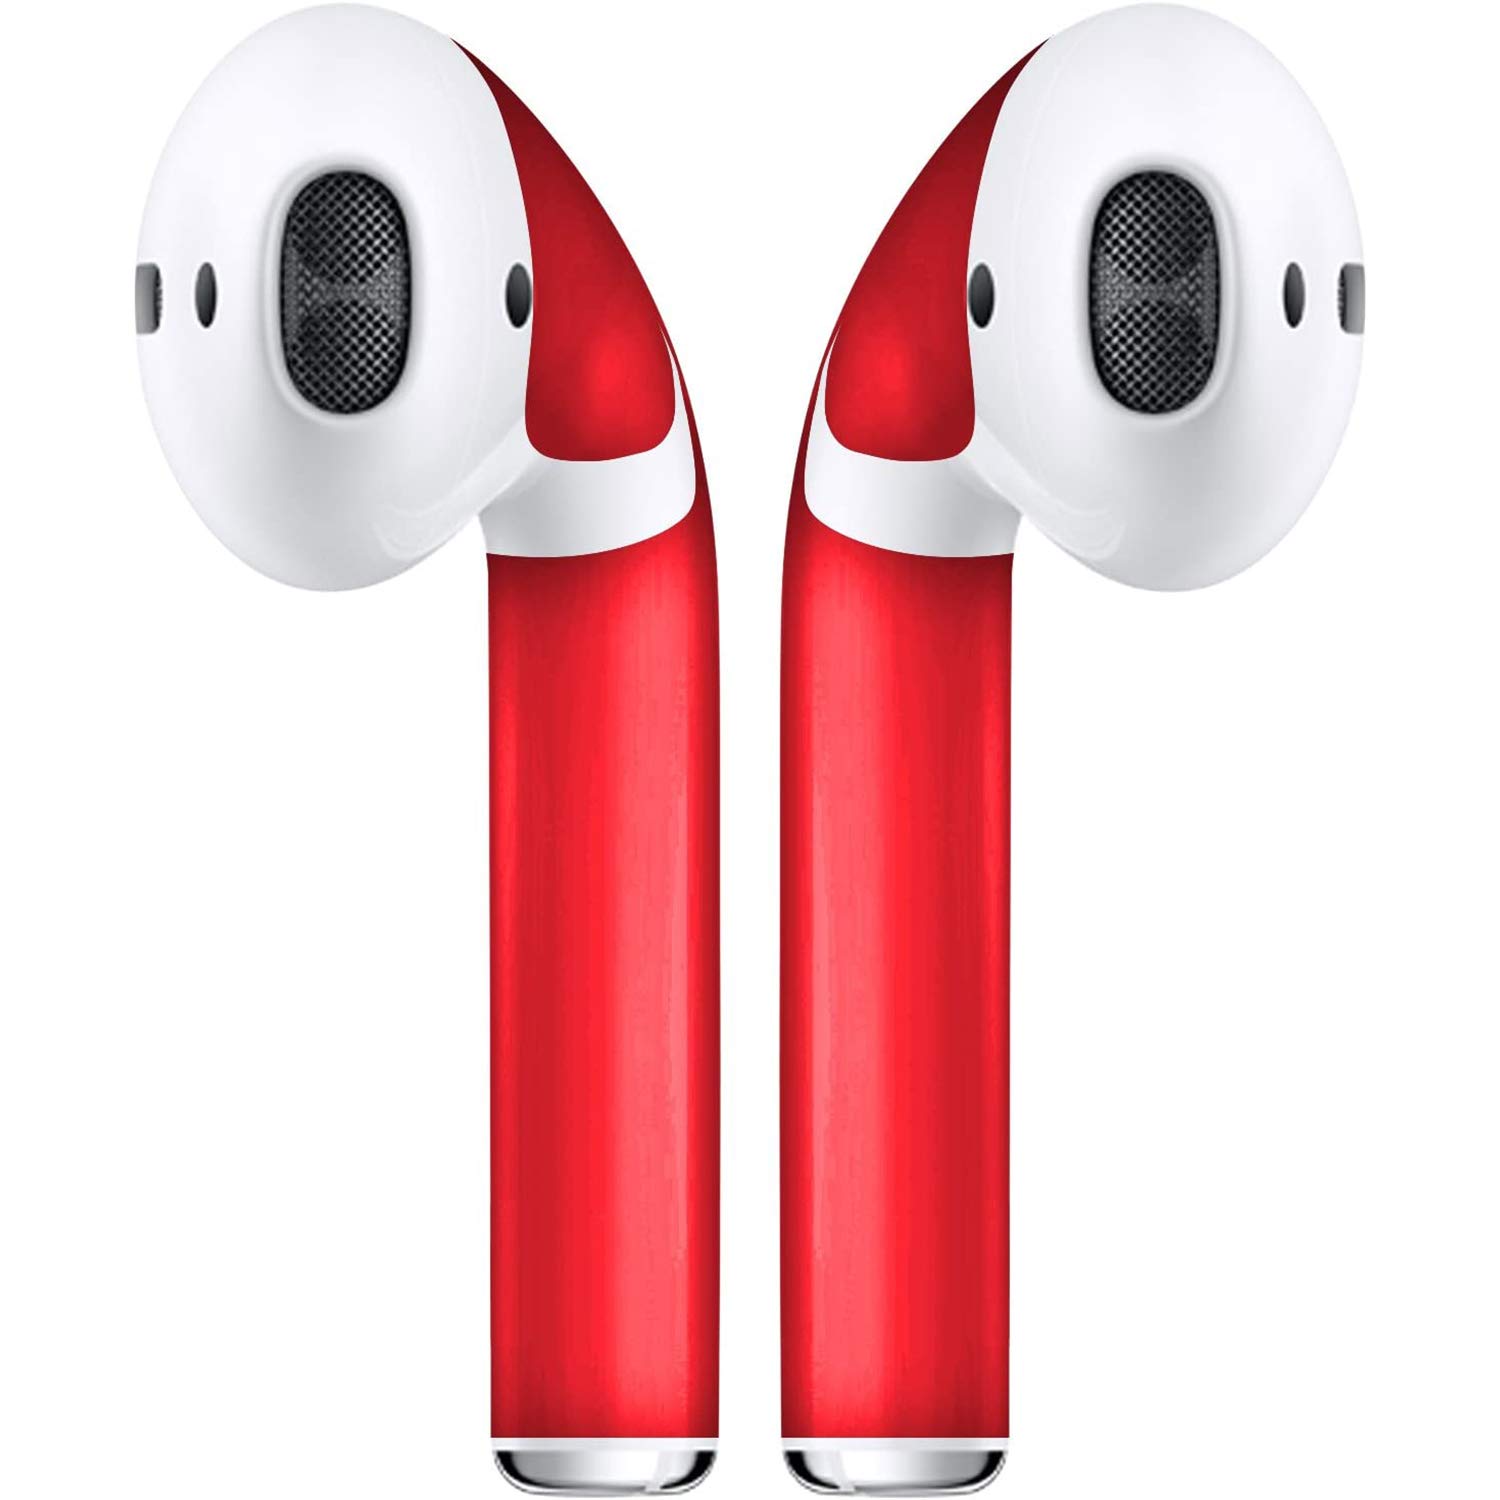 Book Cover AirPod Skins Protective Wraps - Stylish Covers for Protection & Customization, Compatible with Apple AirPods (Red)